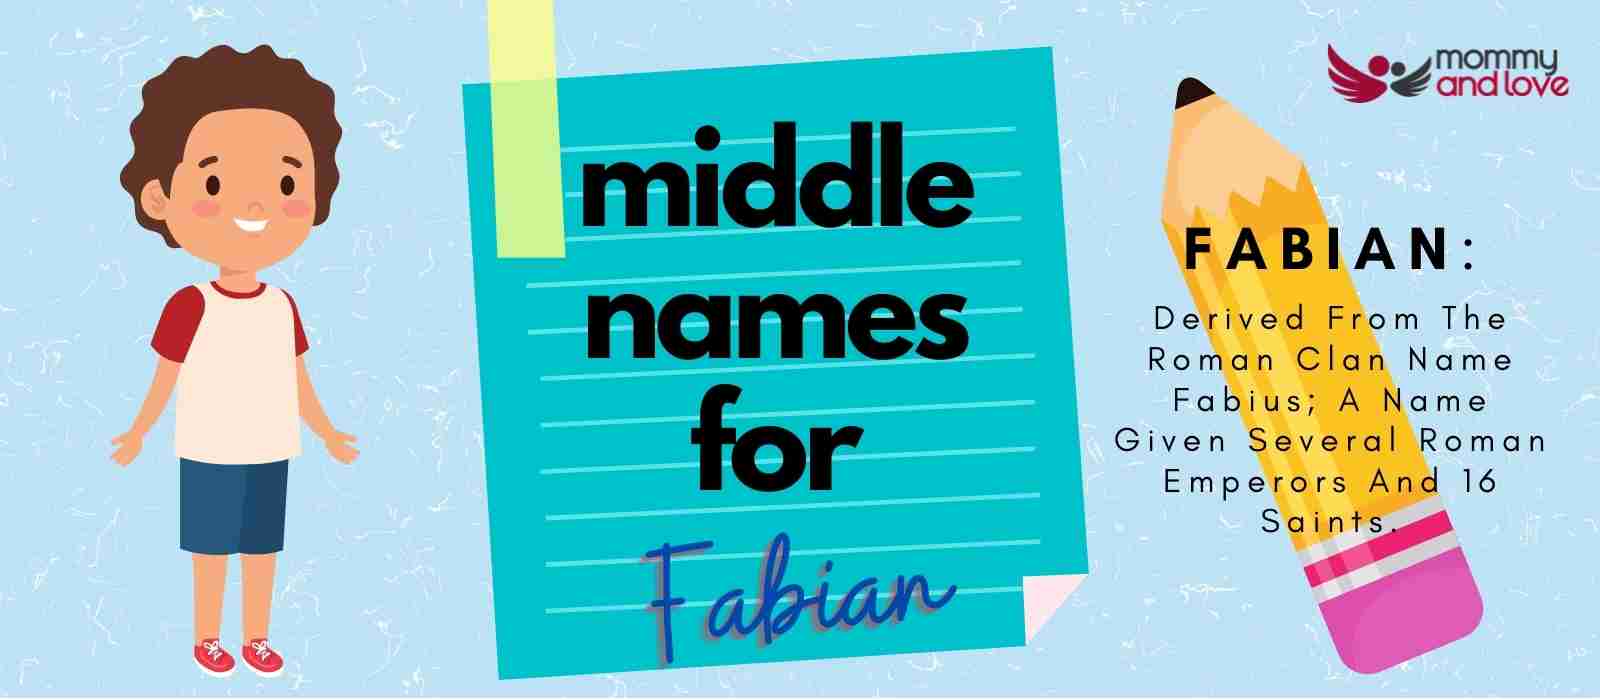 Middle Names for Fabian